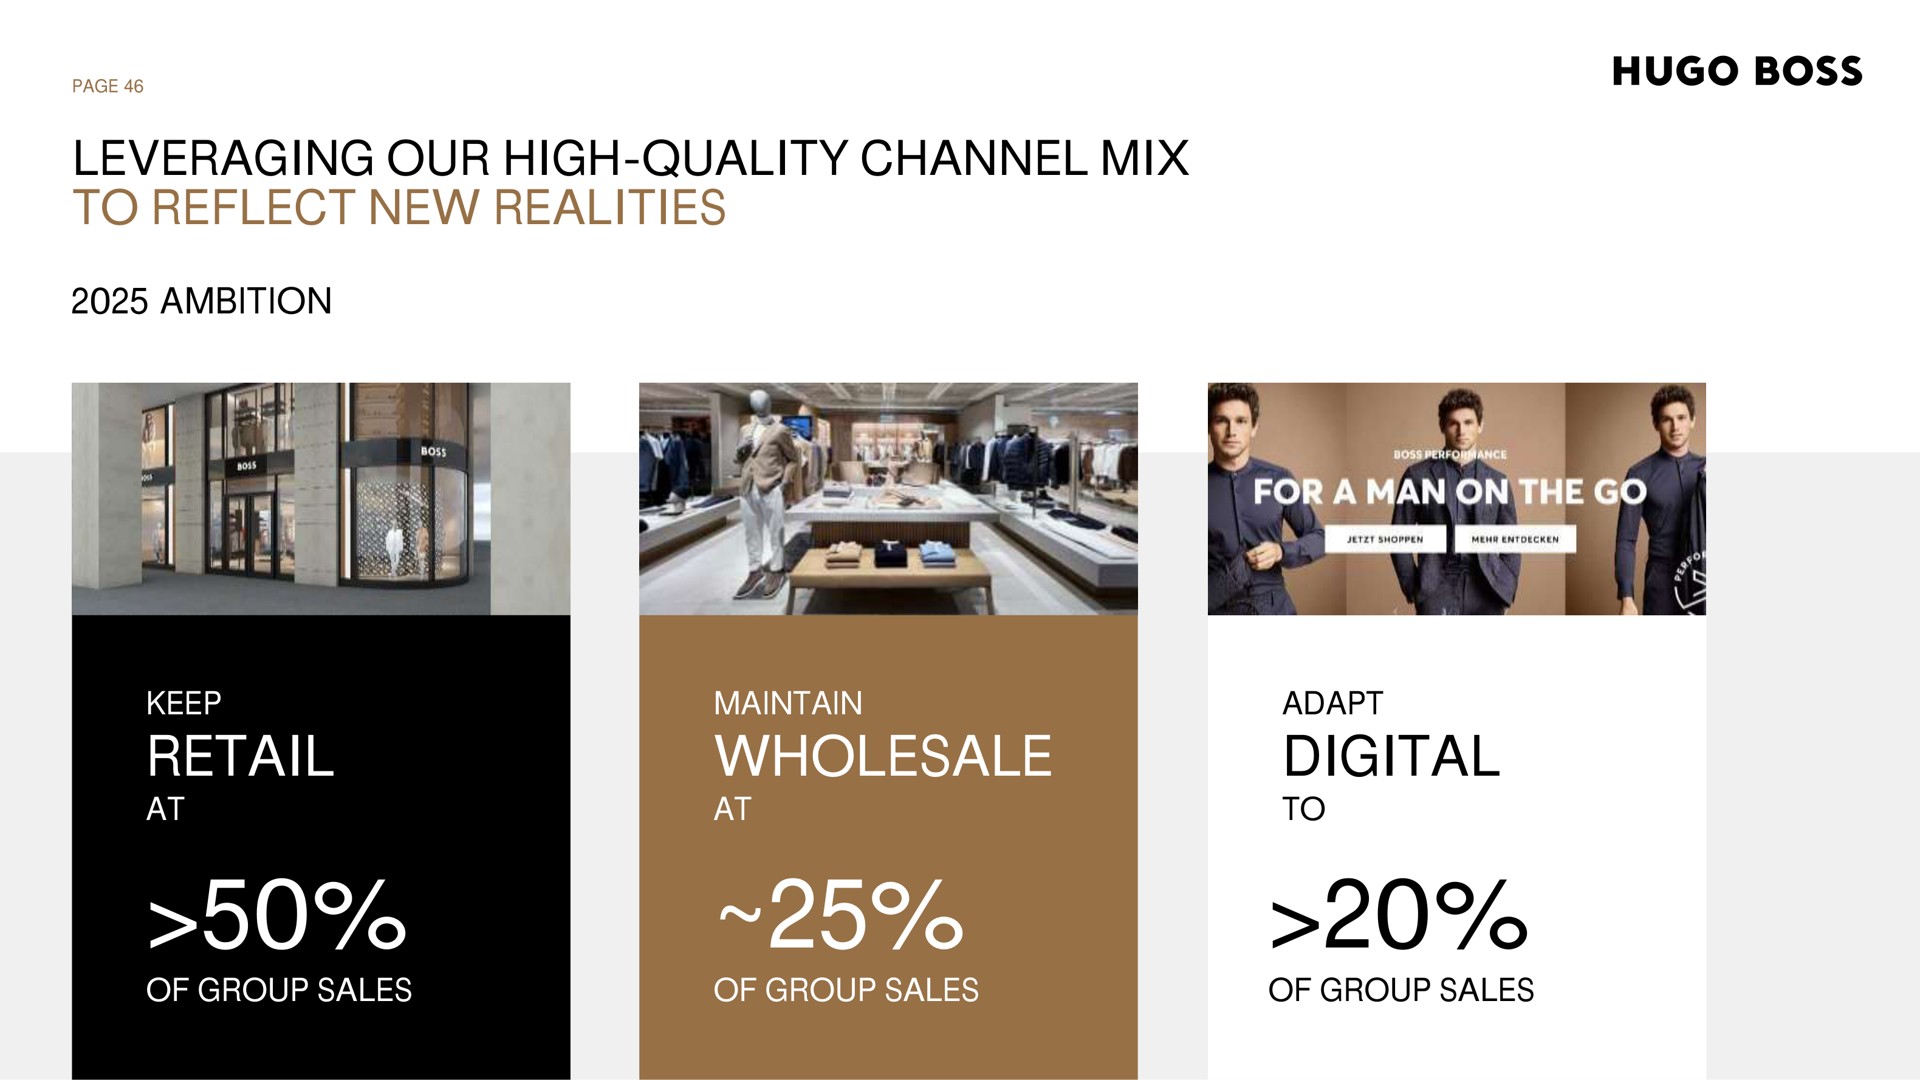 leveraging our high quality channel mix to reflect new realities retail wholesale digital ambition boss ale of group sales maintain of group sales by of group sales | Hugo Boss